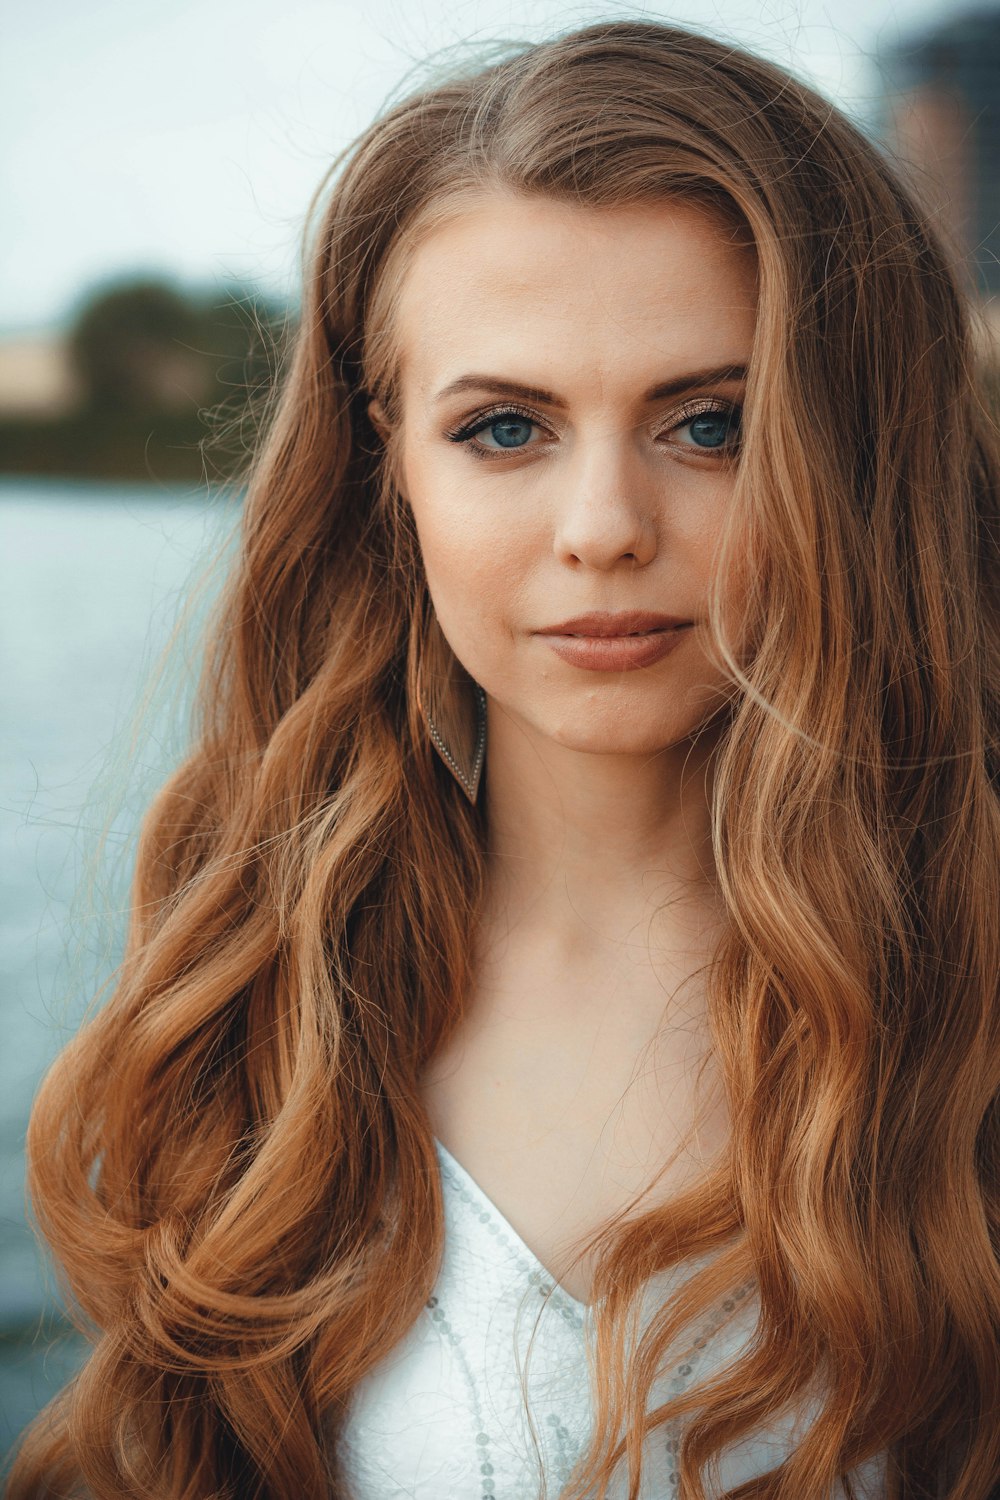 a woman with long red hair and blue eyes